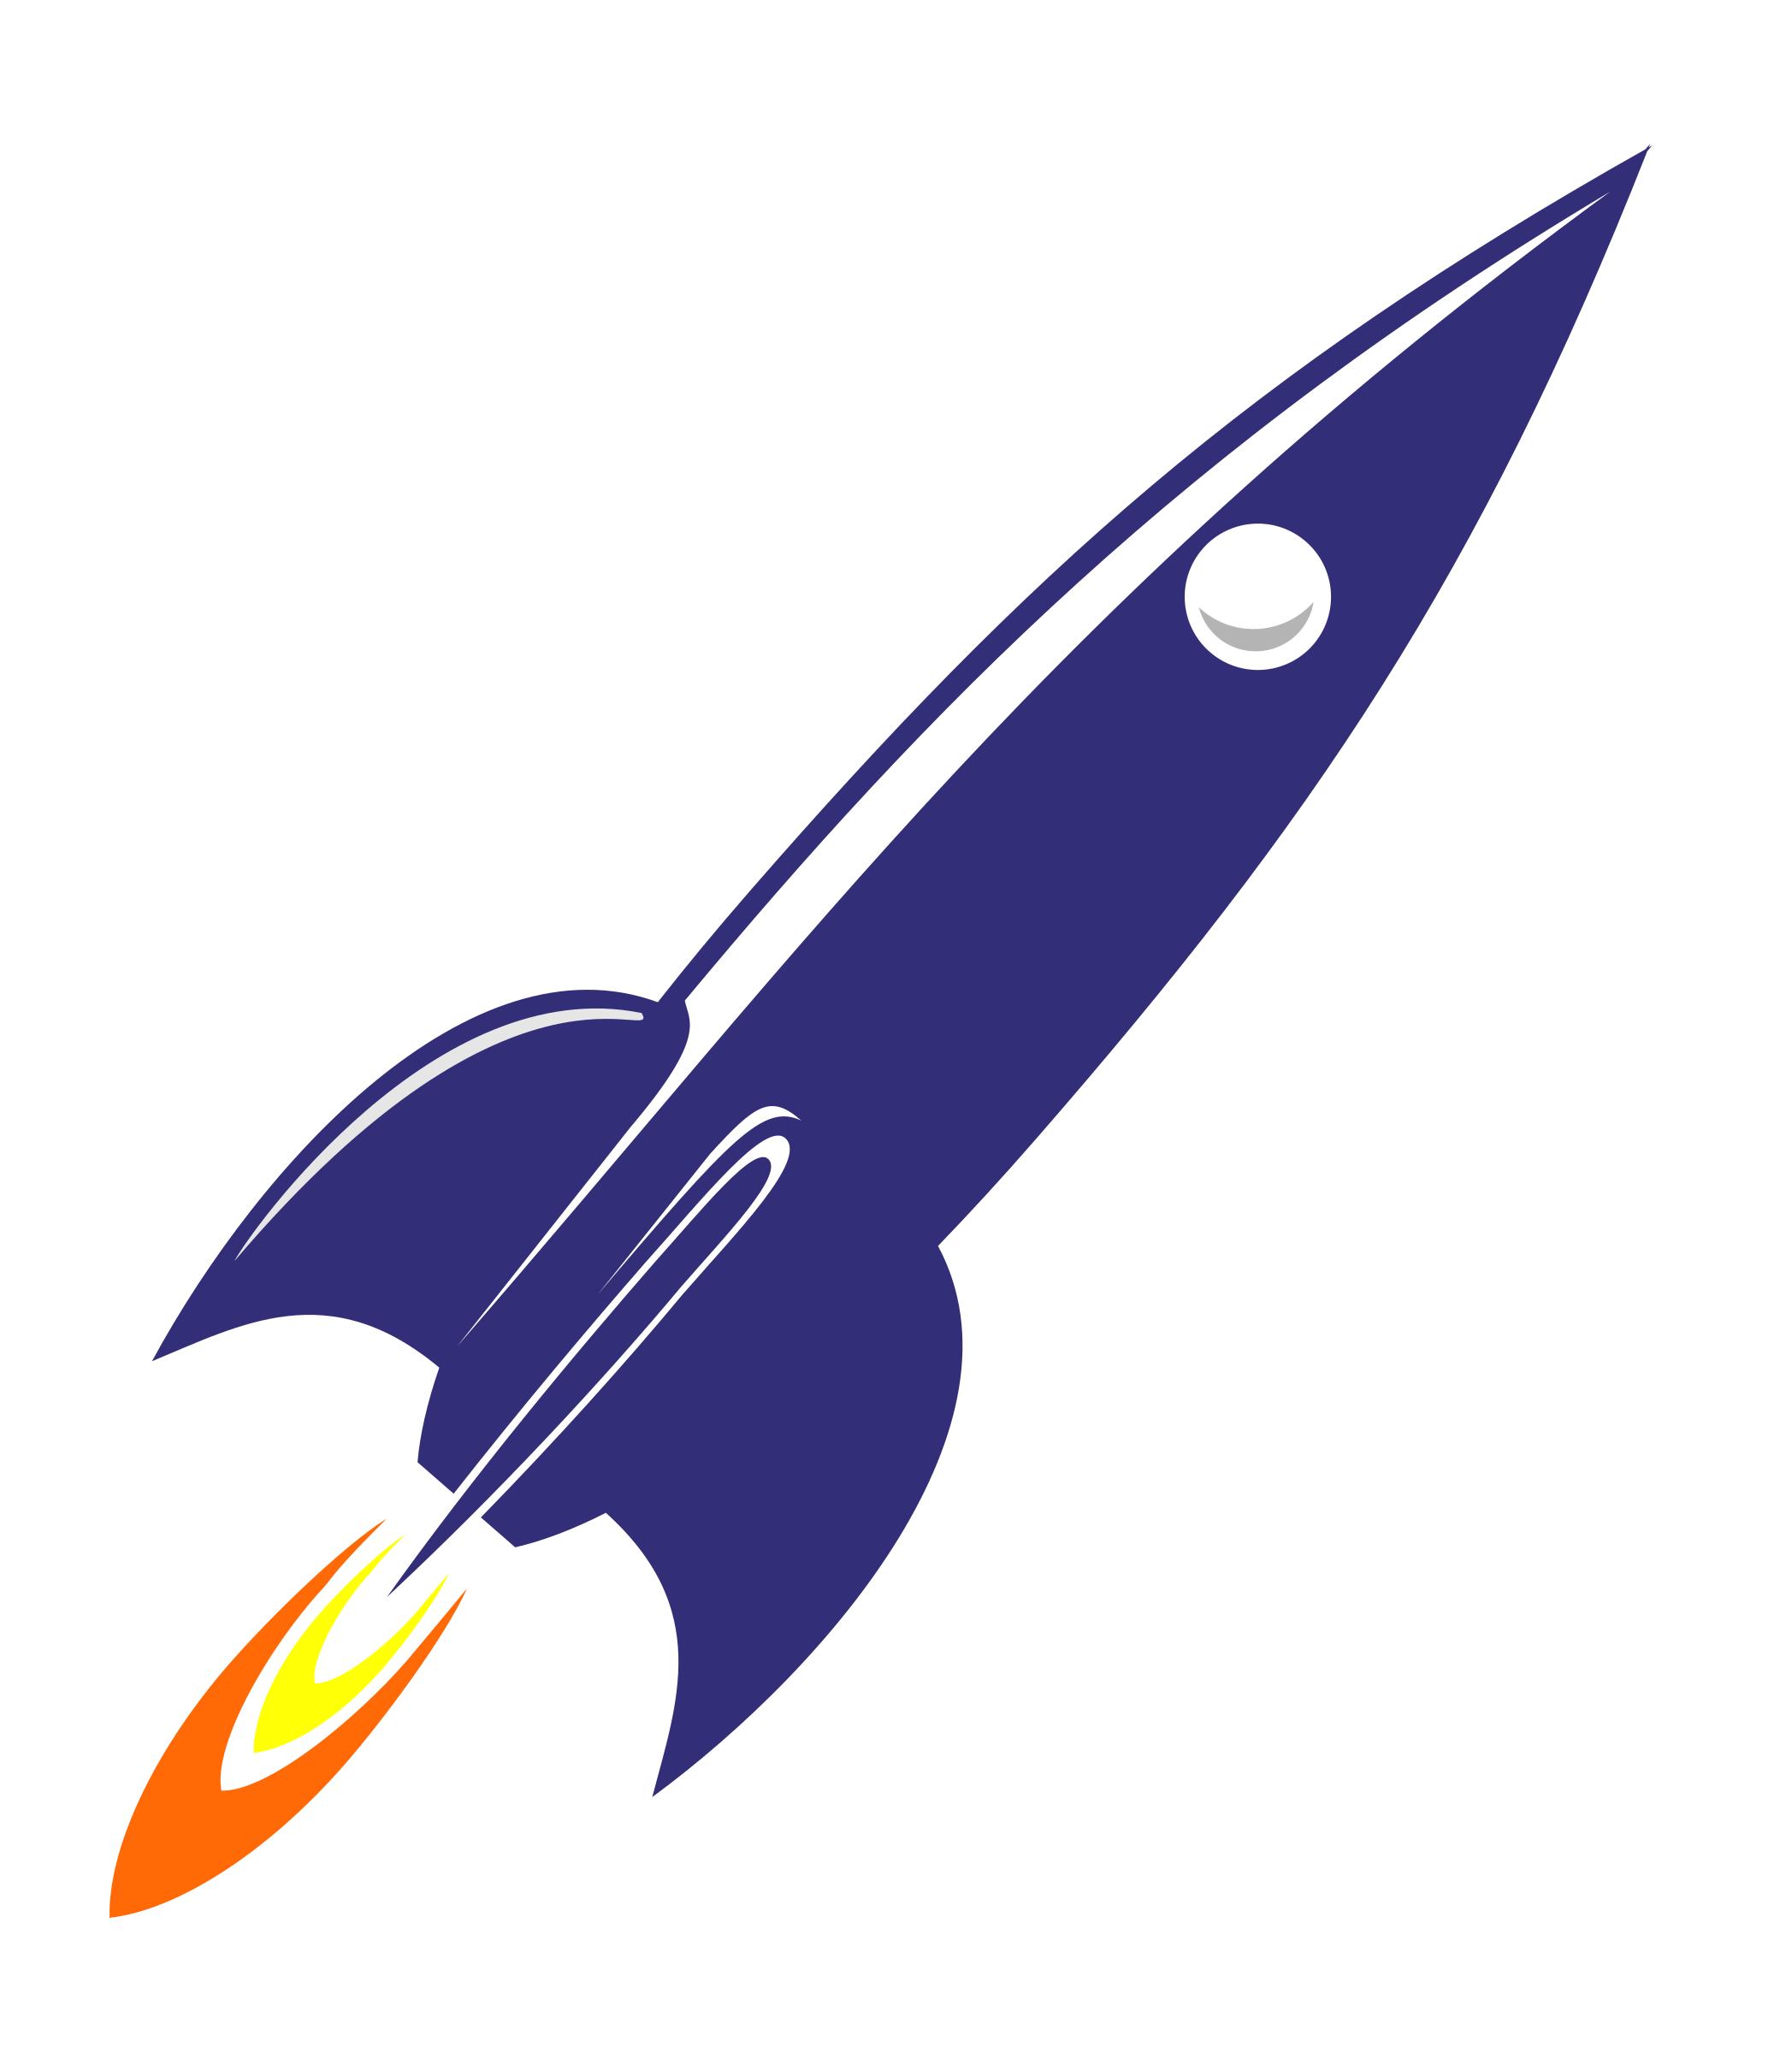 R is for Rocket png